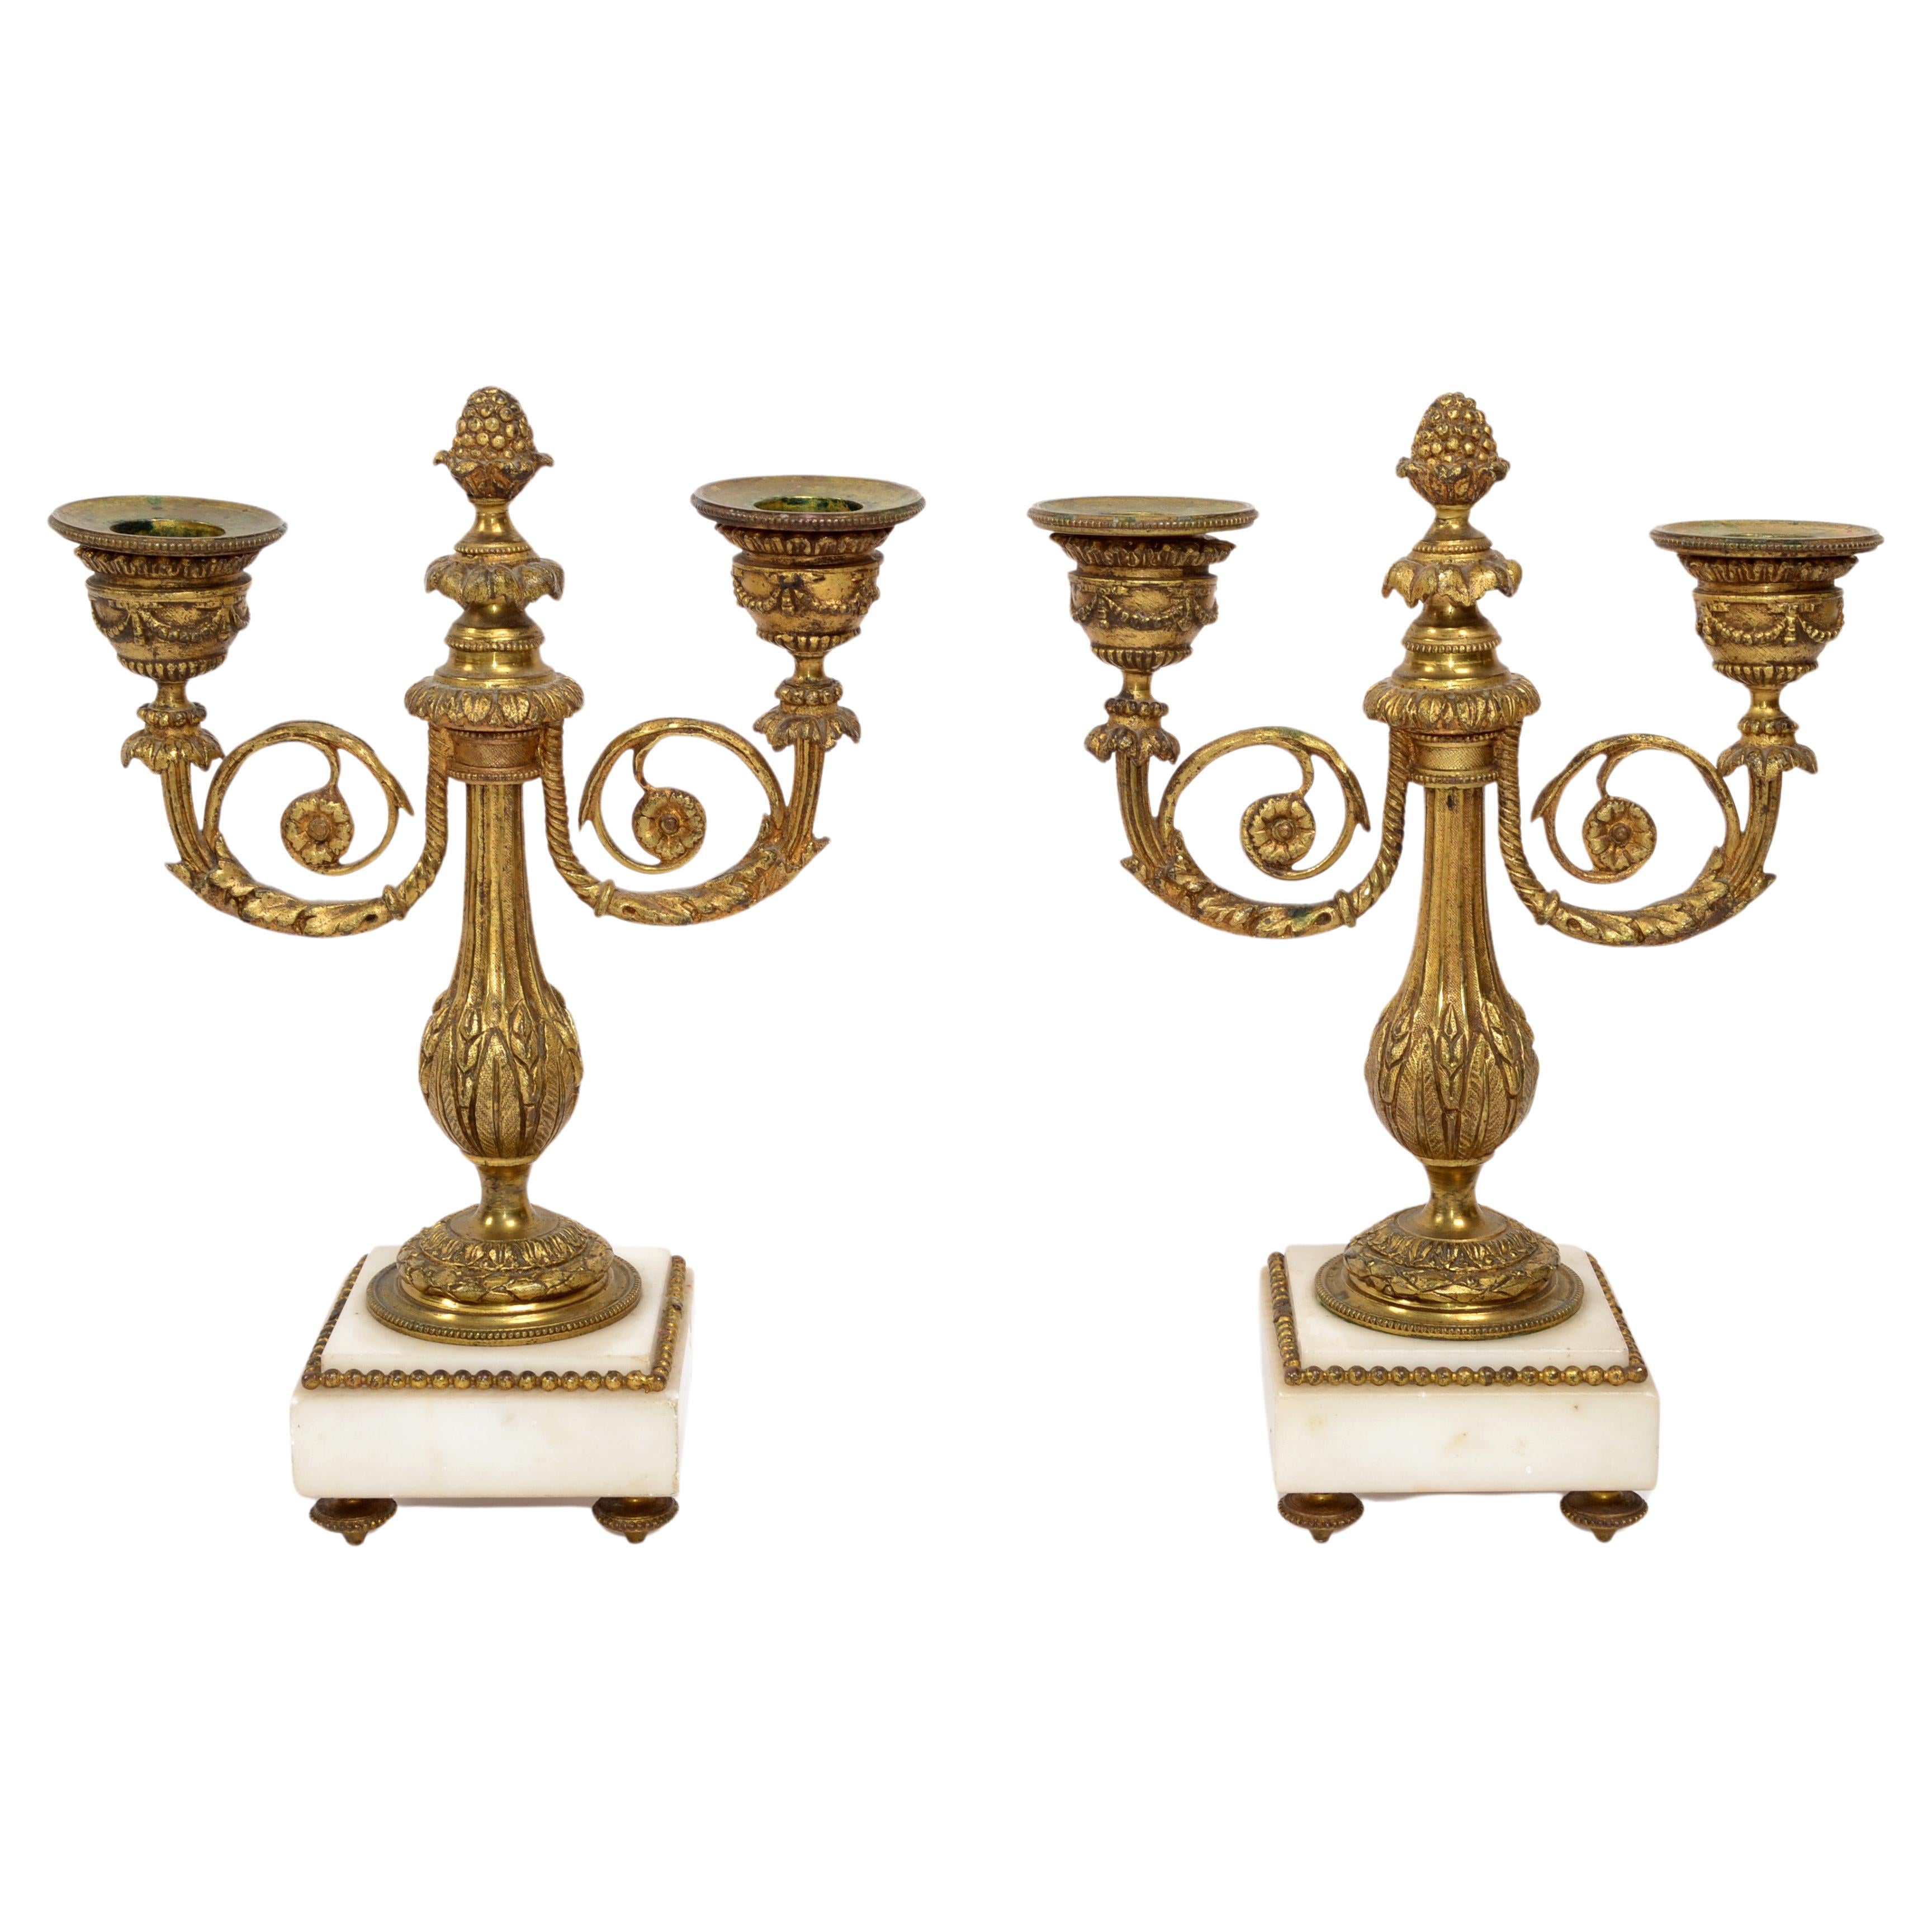 Pair Napoleon III French Ornate Gilt Bronze Marble Candelabras Candle Holders